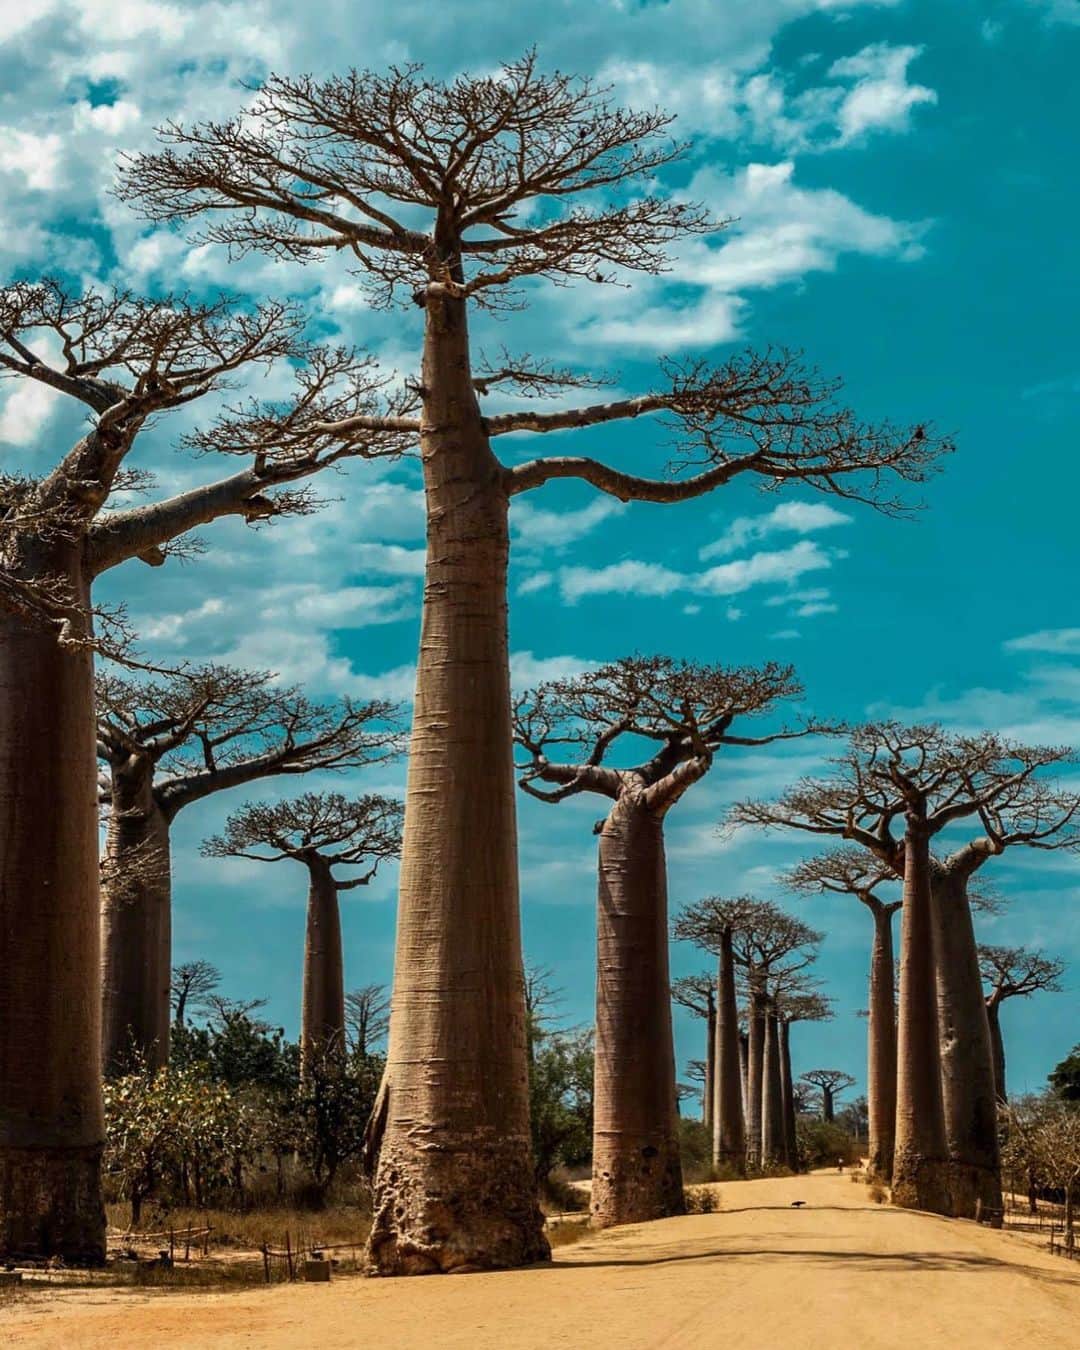 Cubby Grahamのインスタグラム：「Walking through the land of gentle giants. - Reminiscing on this surreal experience looking up at these Grandidier baobabs - the biggest and most iconic of Madagascar's six species of baobabs. You can’t help but be awestruck by the unmatched beauty of this place. It’s truly a wonder to witness and the kinda place that leaves you speechless. - Morondava, Madagascar」